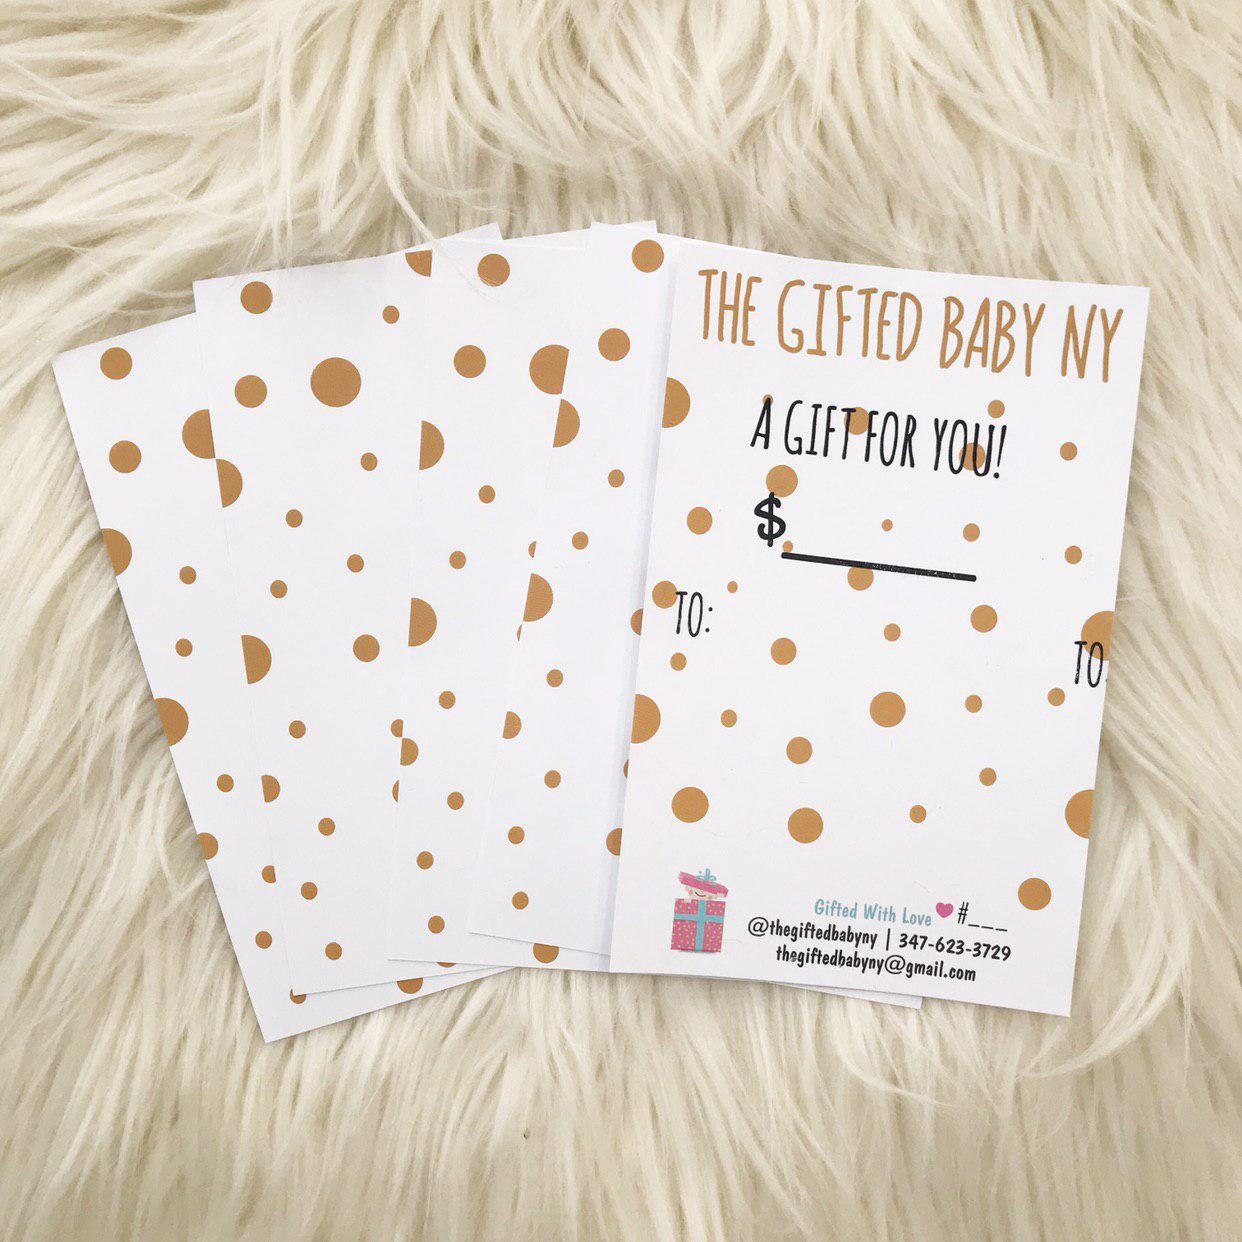 Gift Cards - The Gifted Baby NY